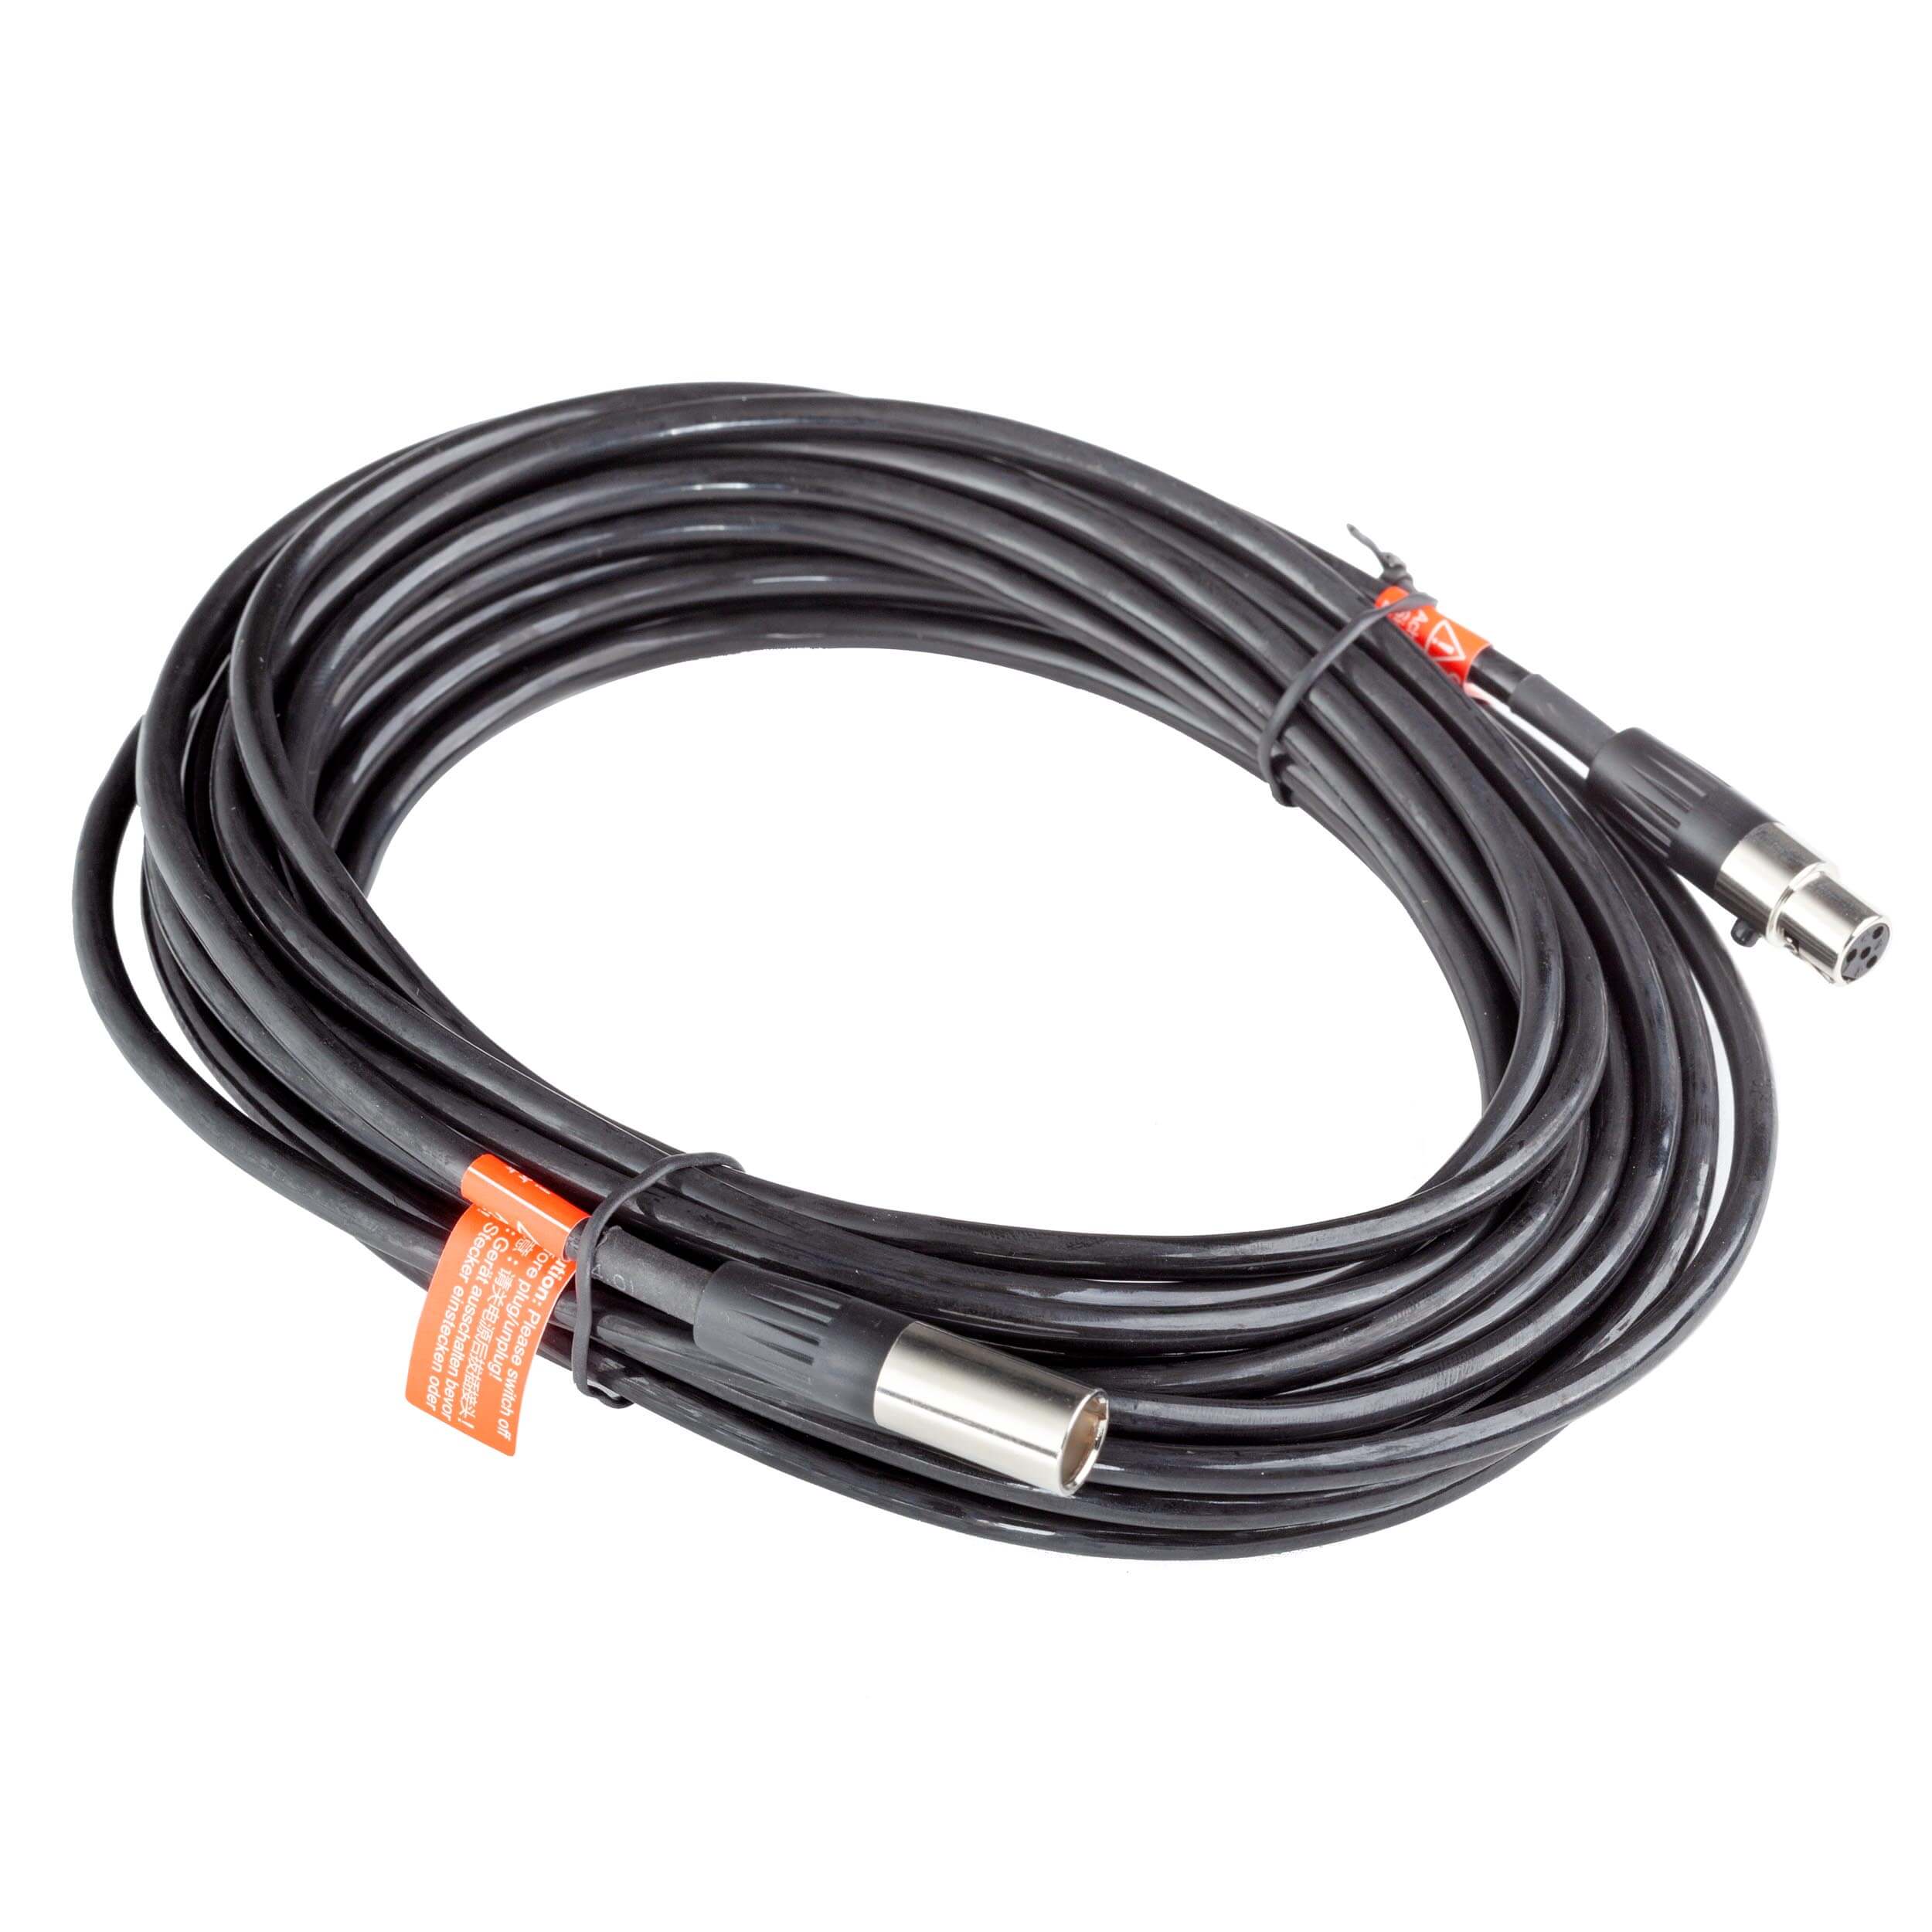 Black 7m Extension Cable For LENNO256 Flexible LED Panel